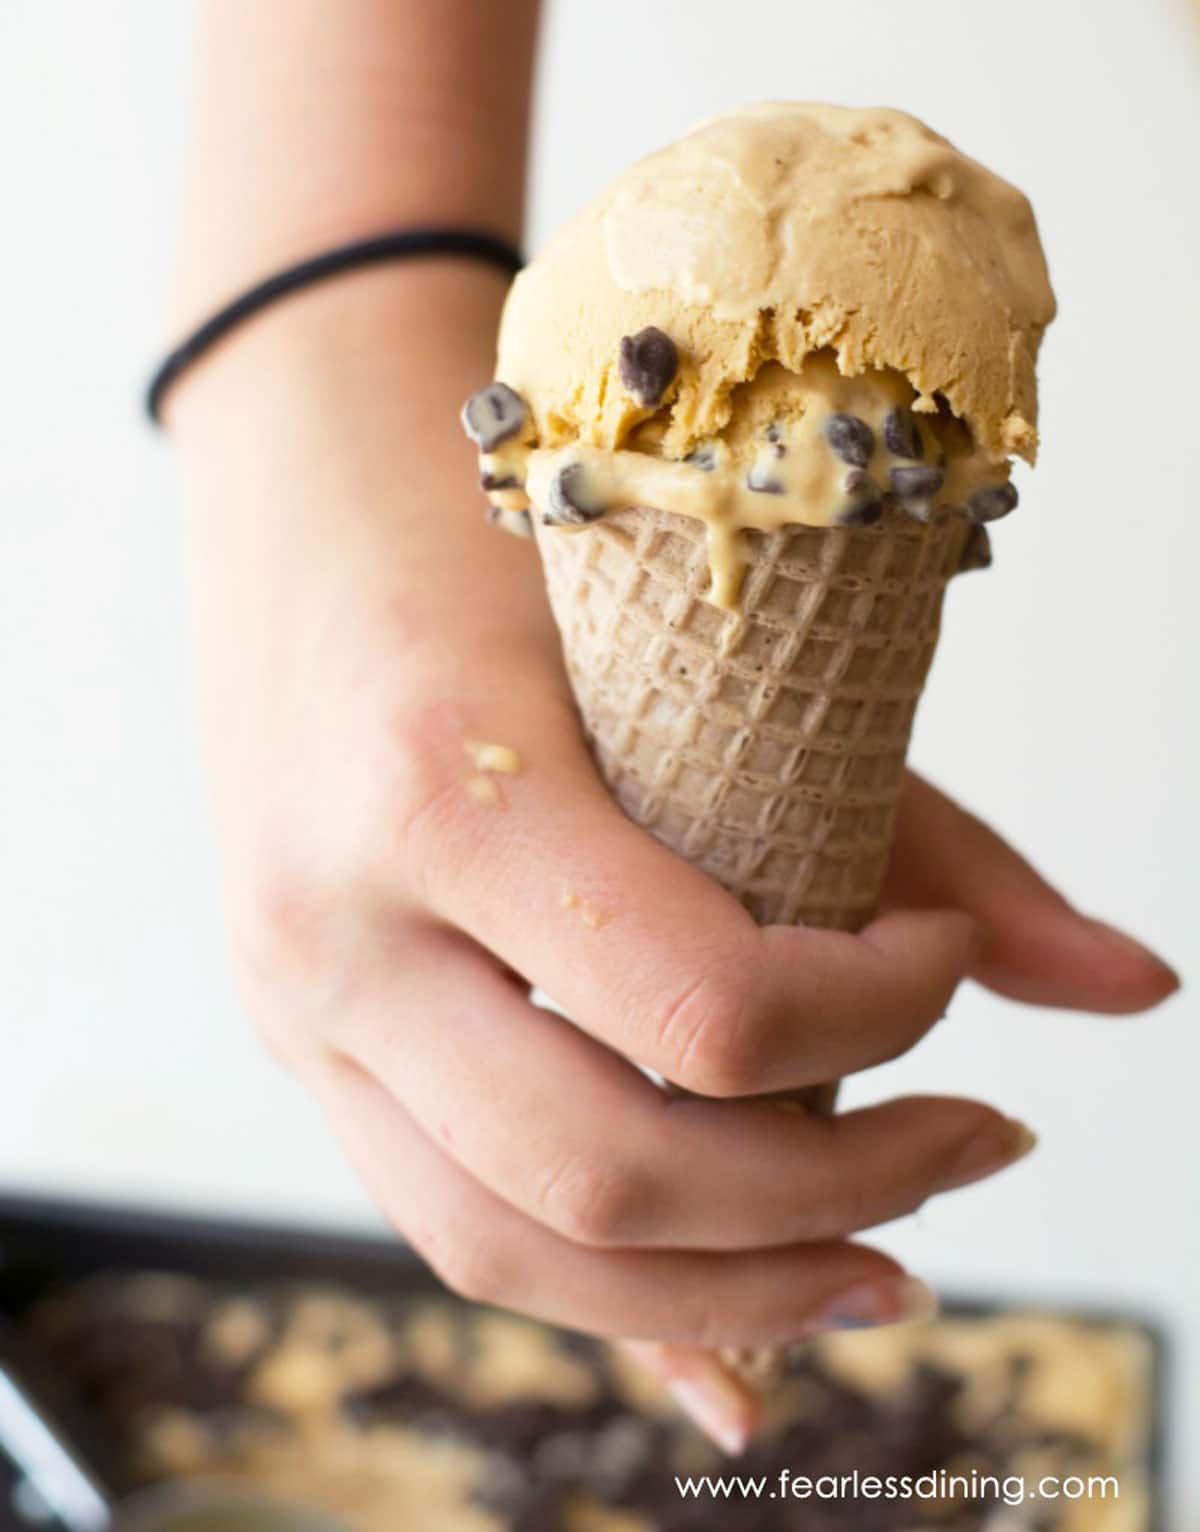 A hand holding an ice cream cone with caramel chip ice cream.